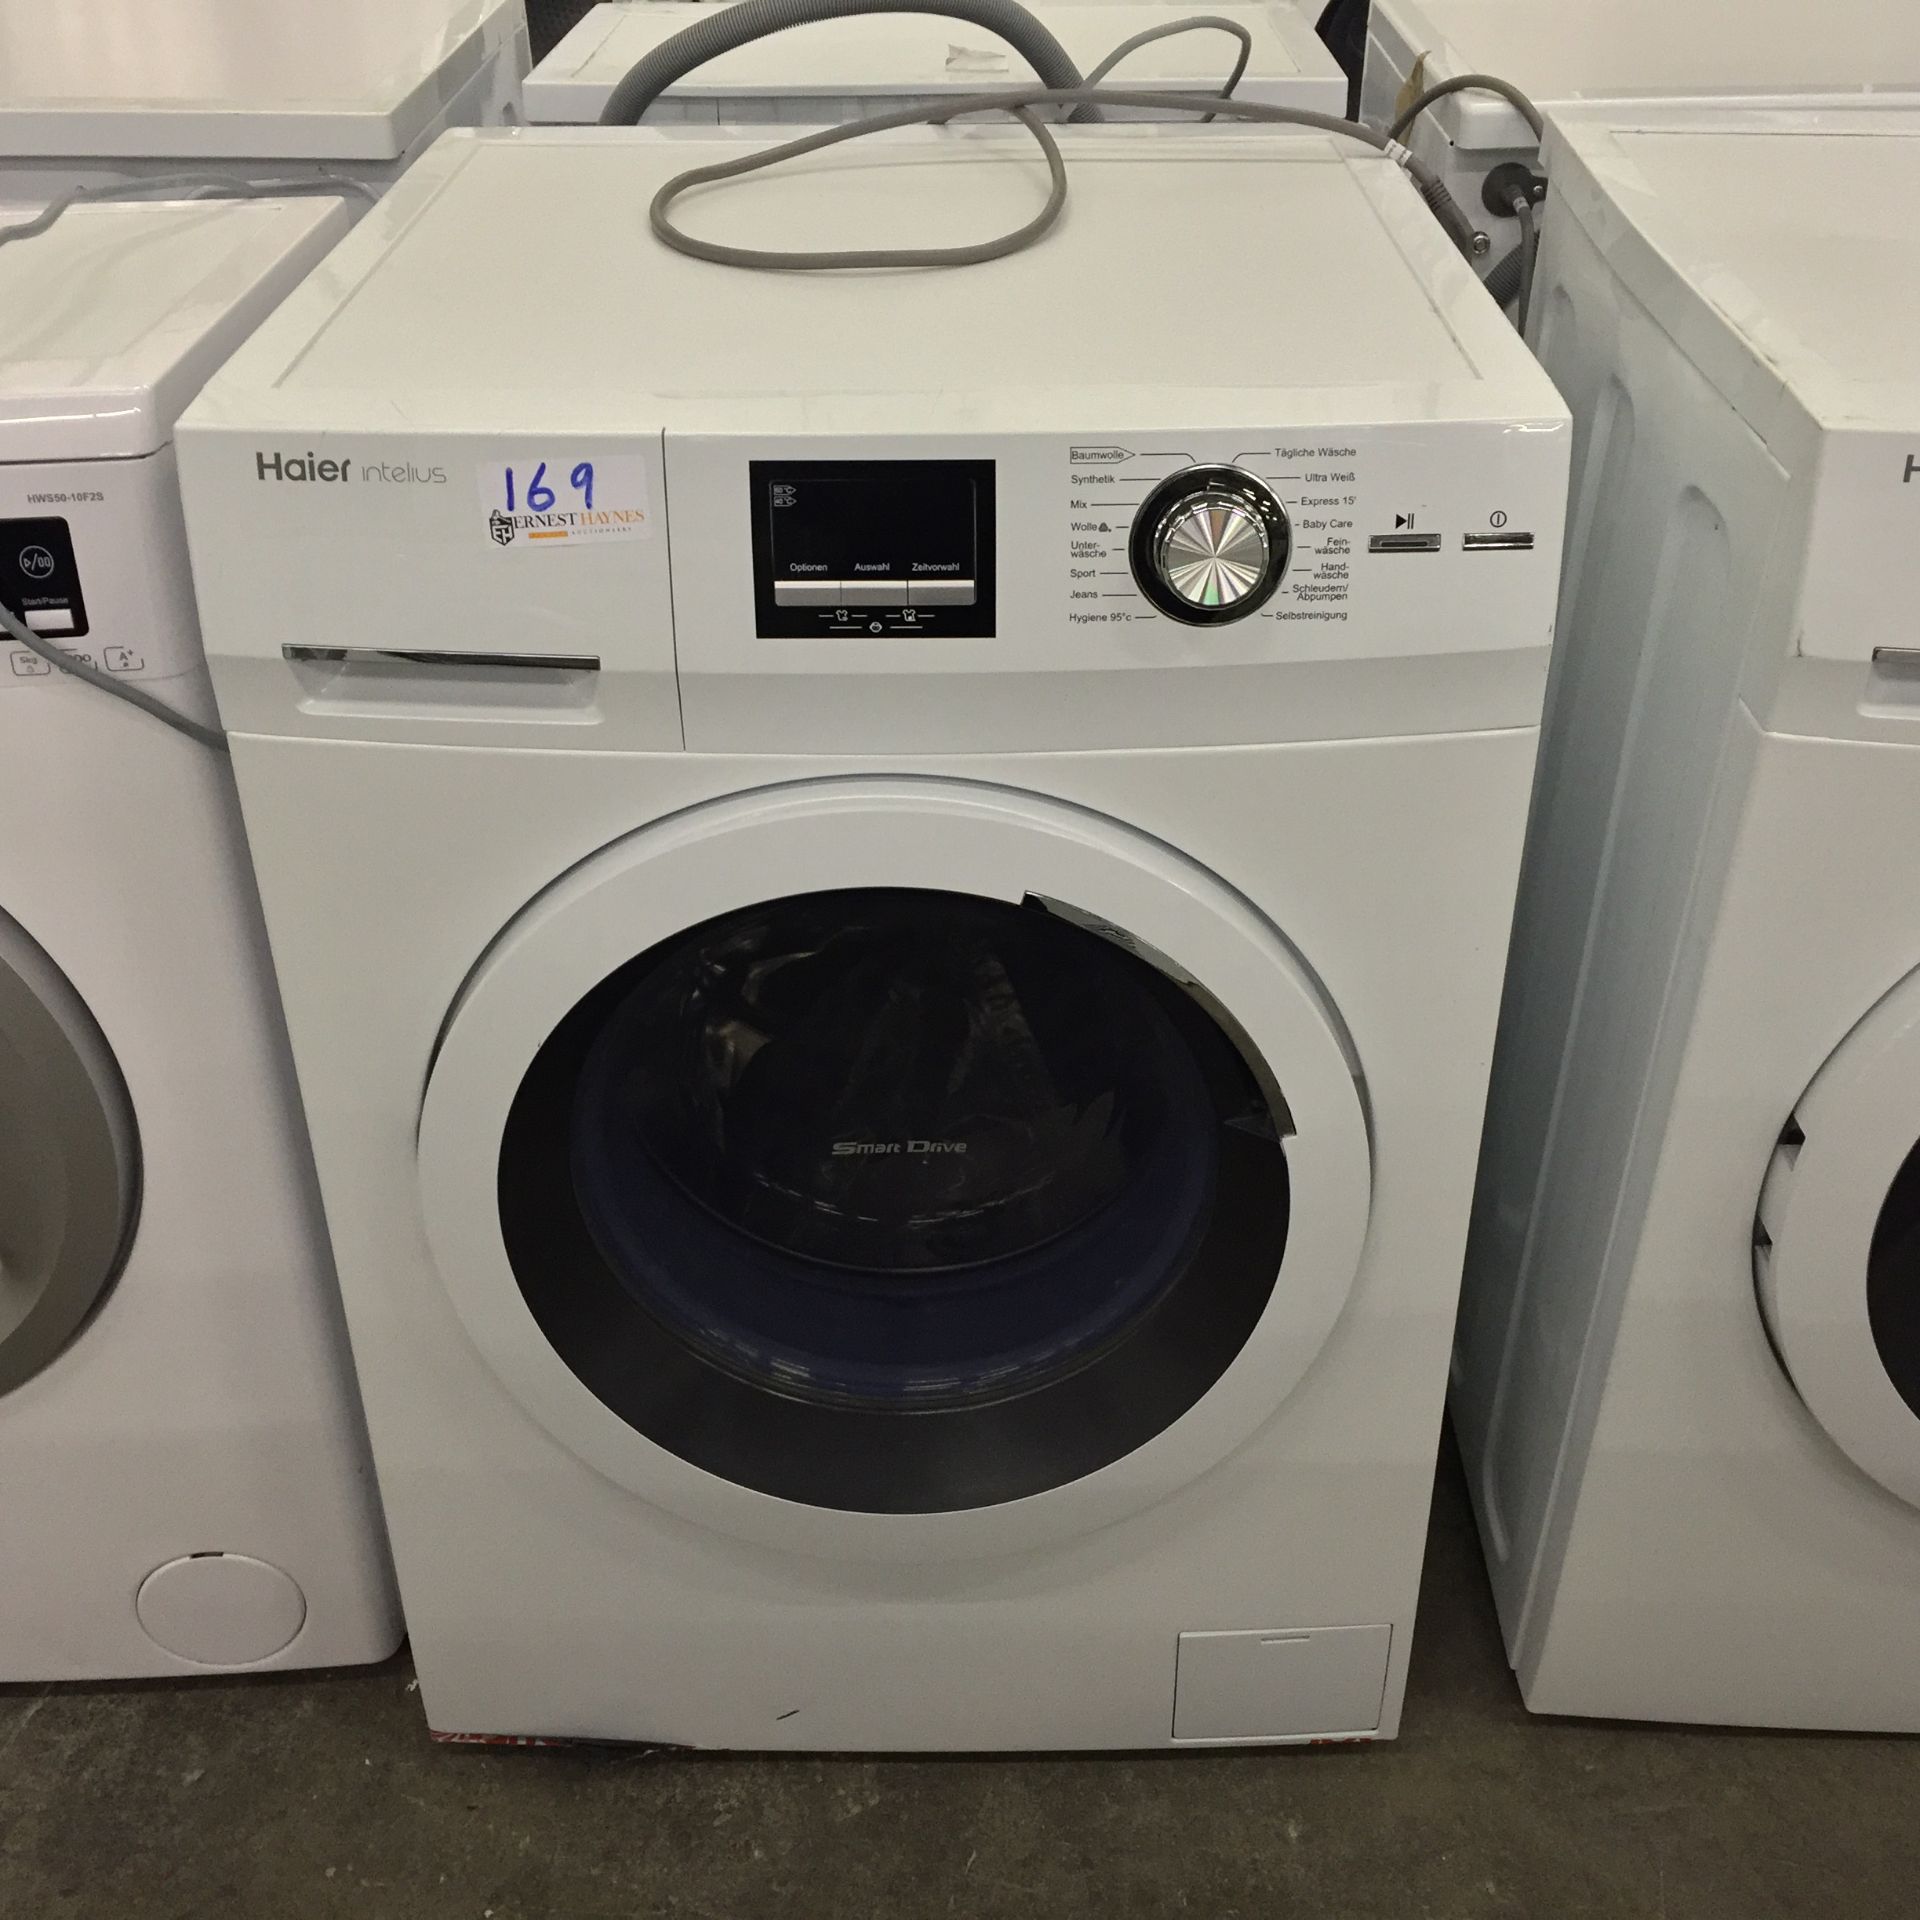 Haier Washing Machine, Powers up, looks unused, Transit bolts attached